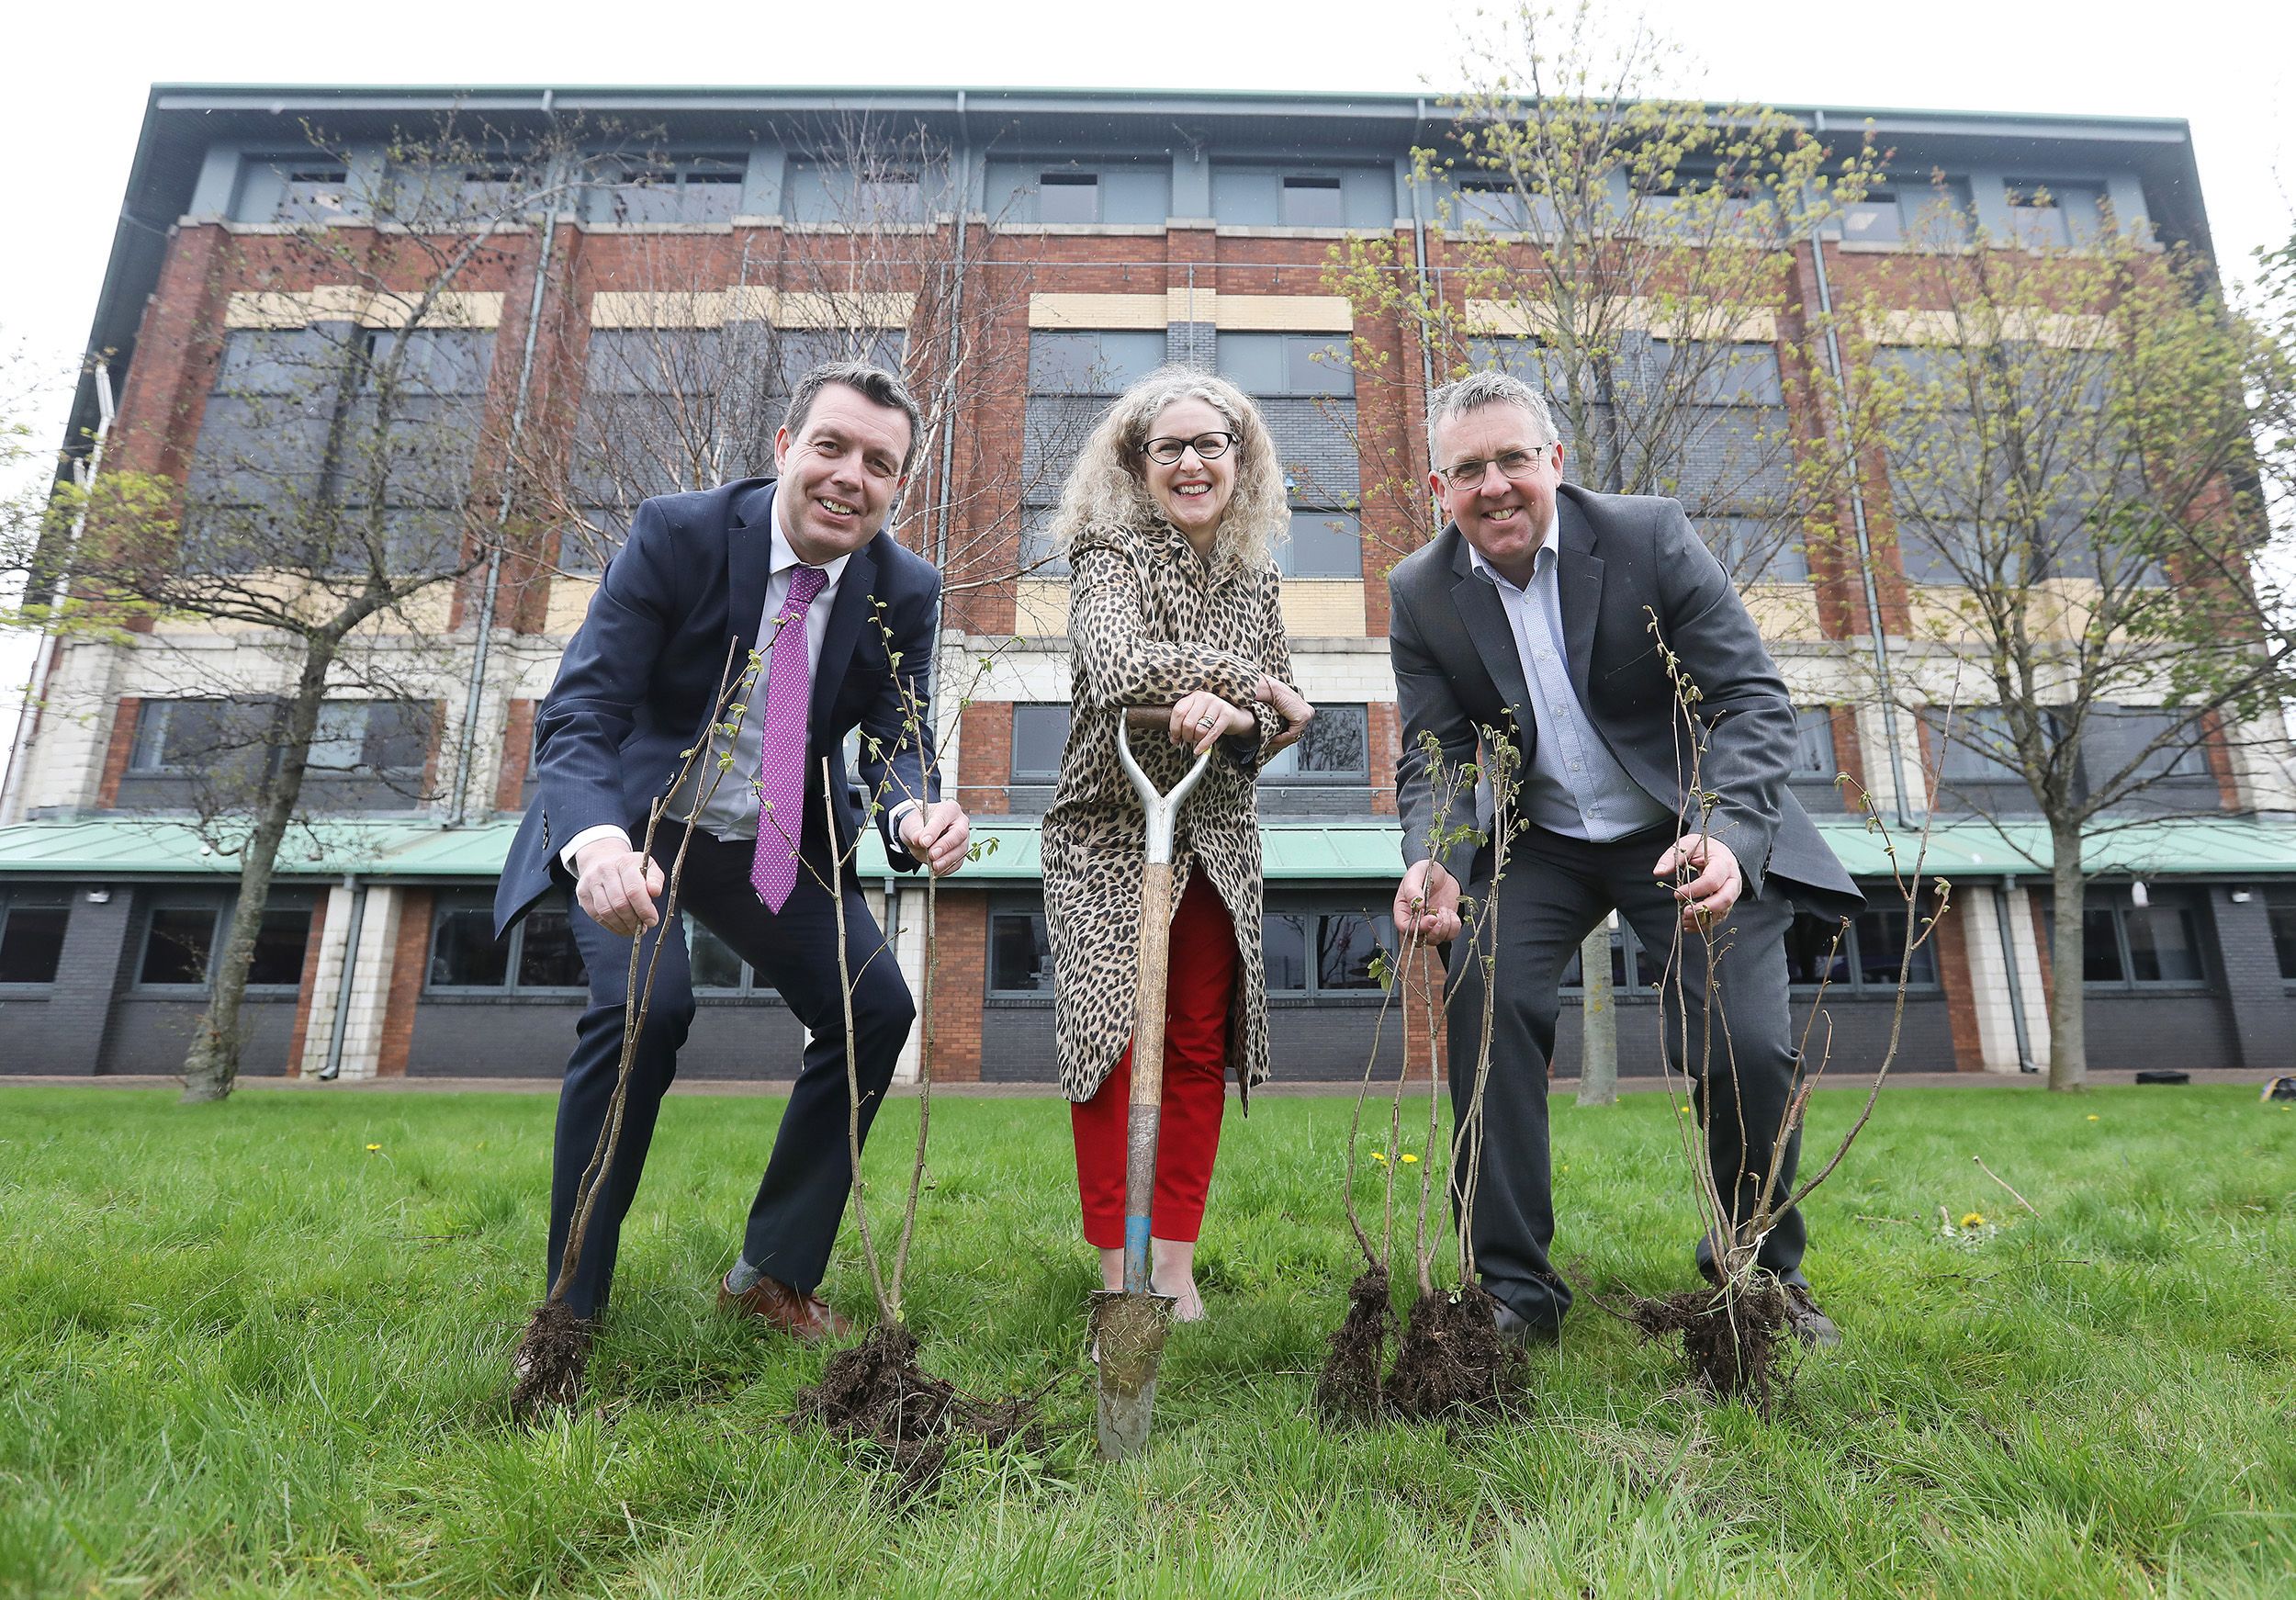 EARTH DAY: Louise Warde Hunter joins Raymond DeLargy and Peter Kane to plant trees at Millfield marking Earth Day